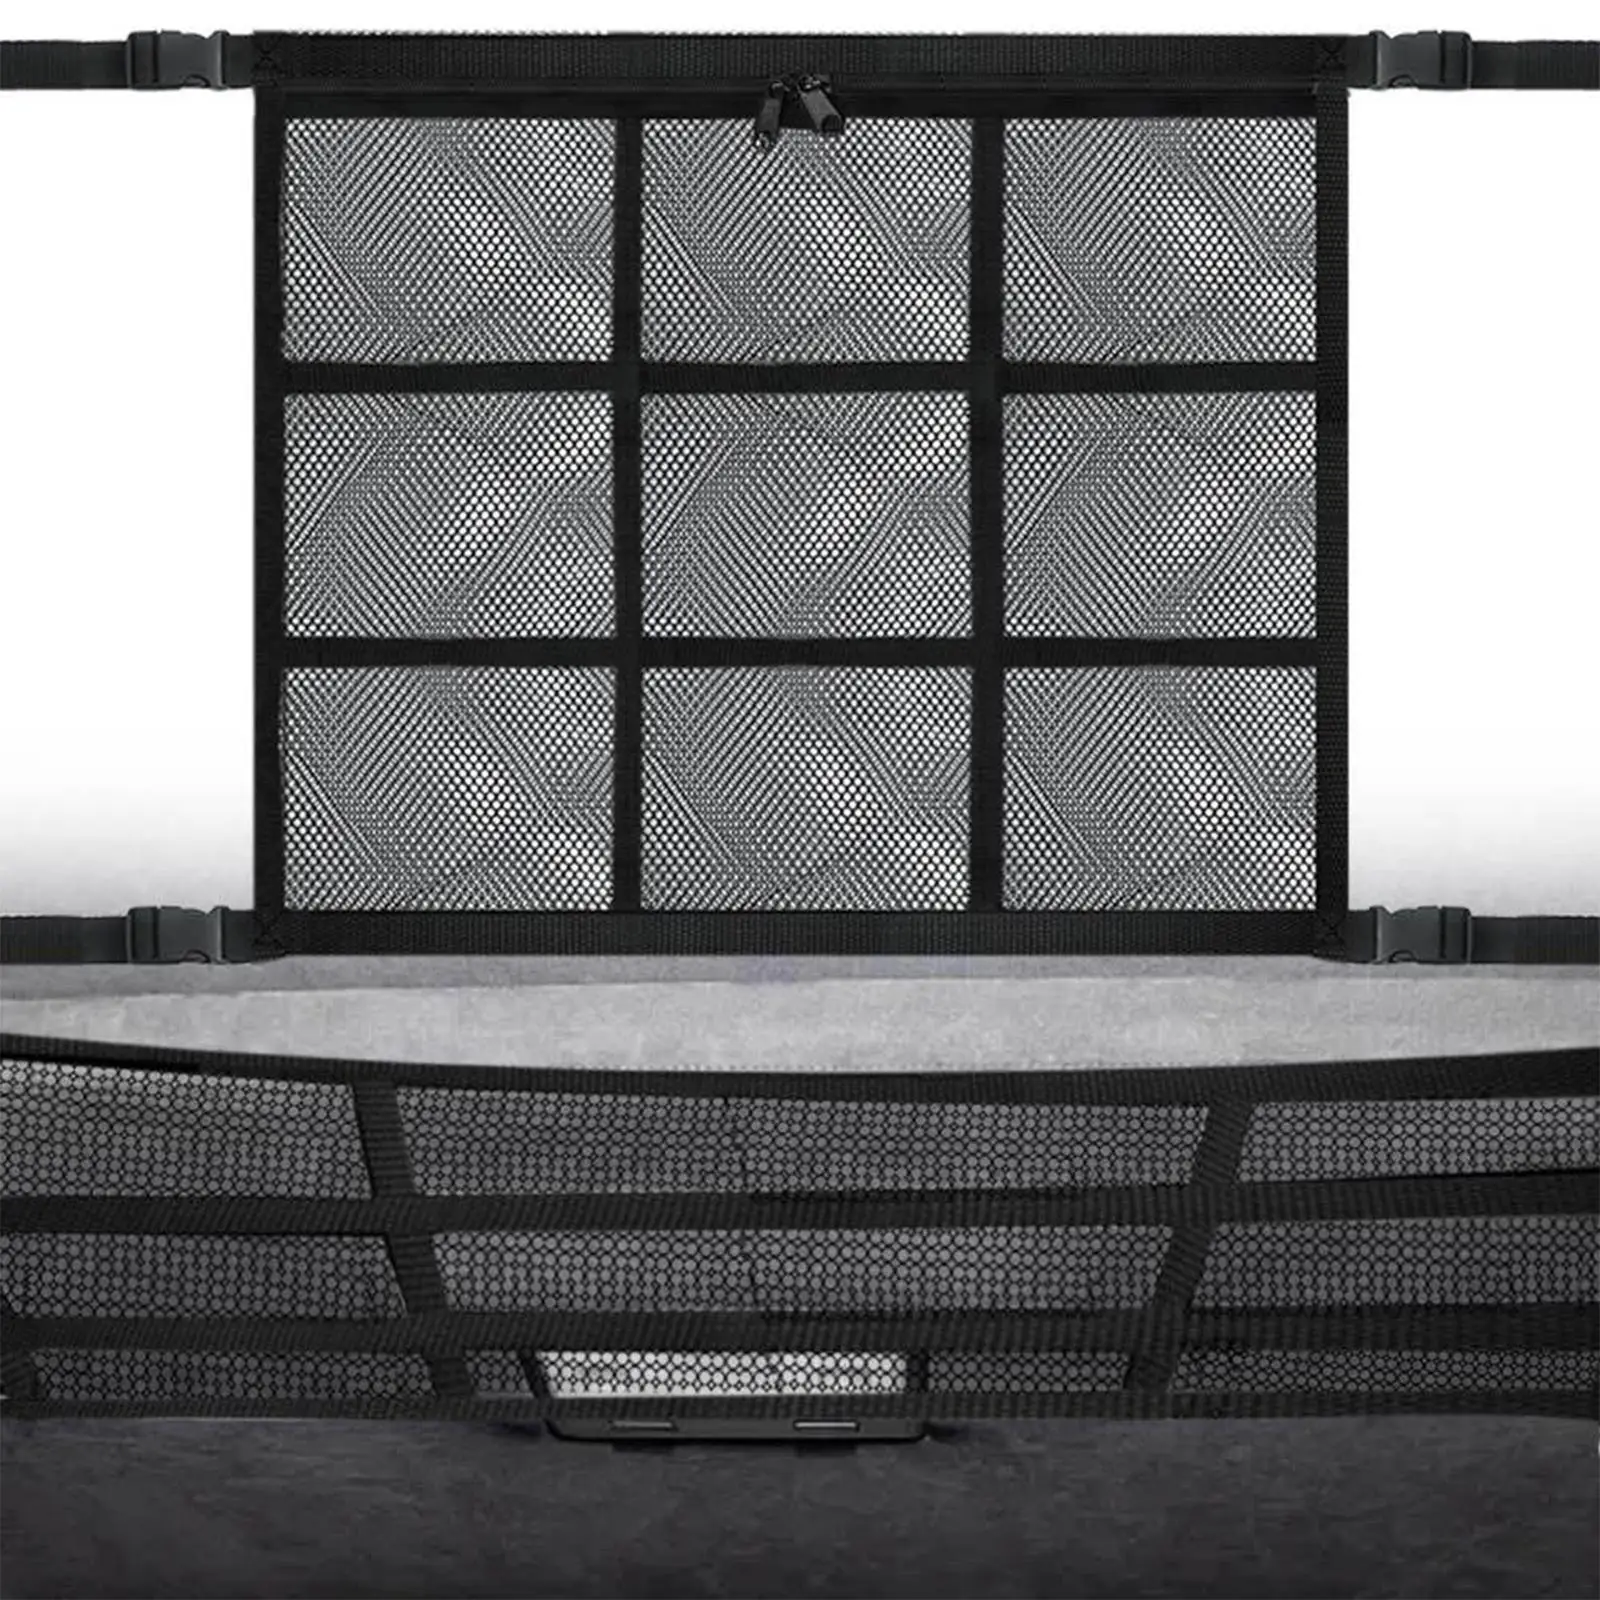 Car Ceiling   Net 90x62cm Pocket Interior Roof Tent Double- for Travel Automotive SUV  Camping Organizer